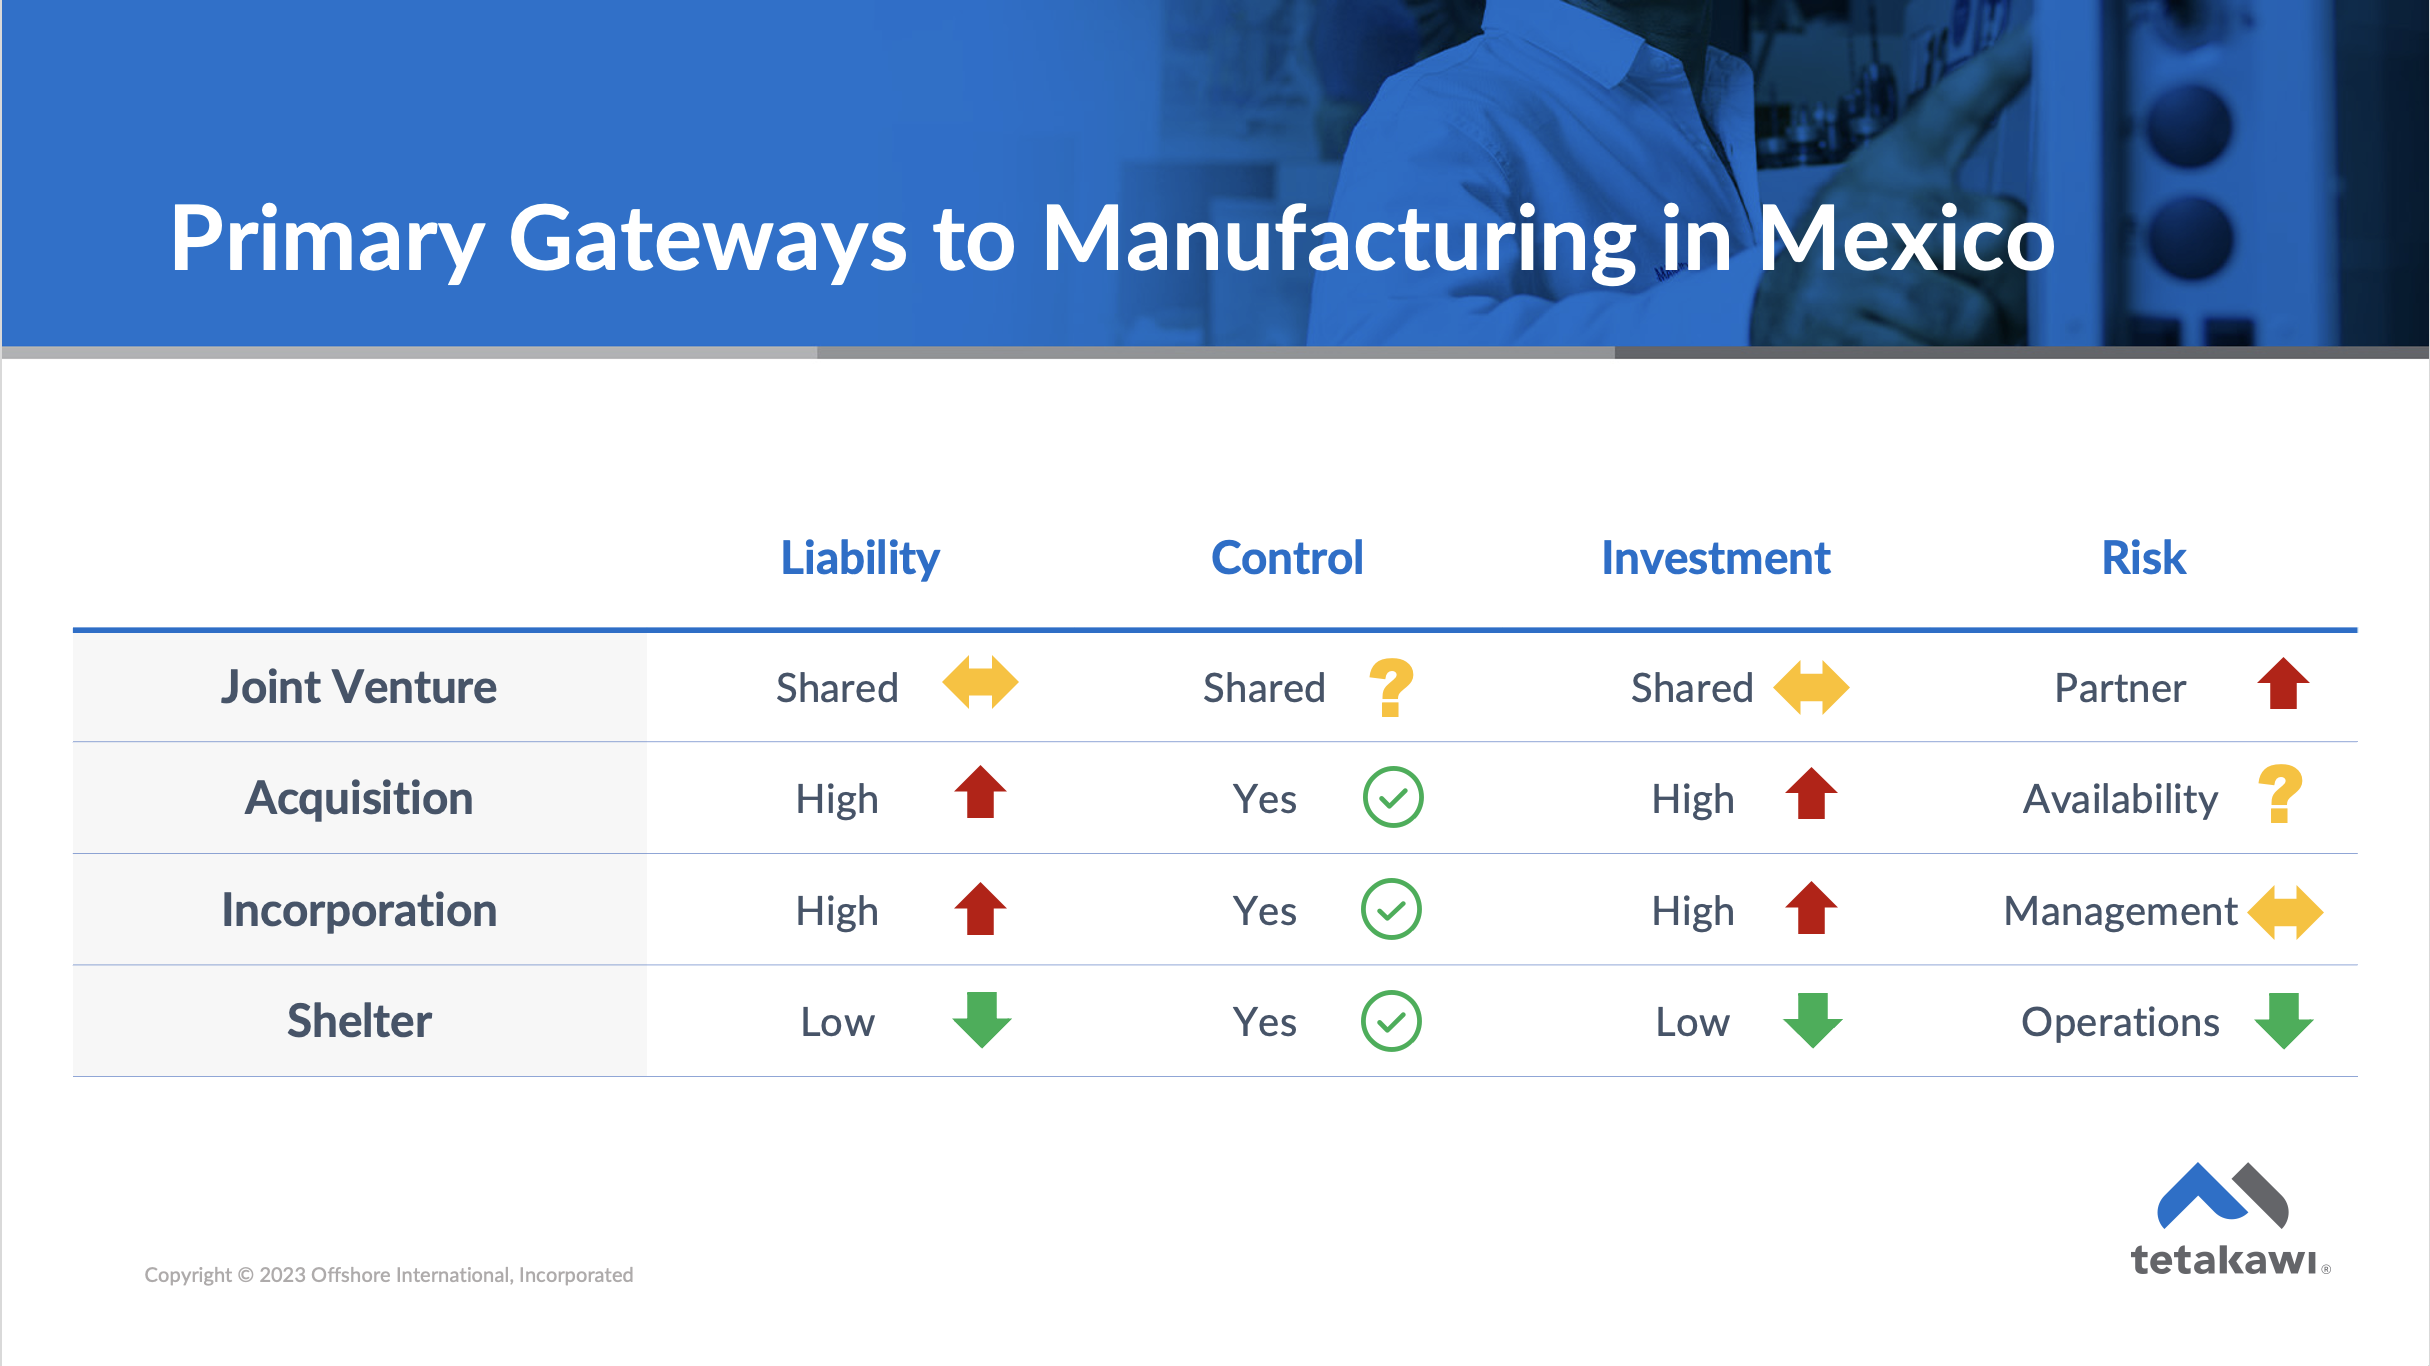 Primary Gateways for Manufacturing in Mexico